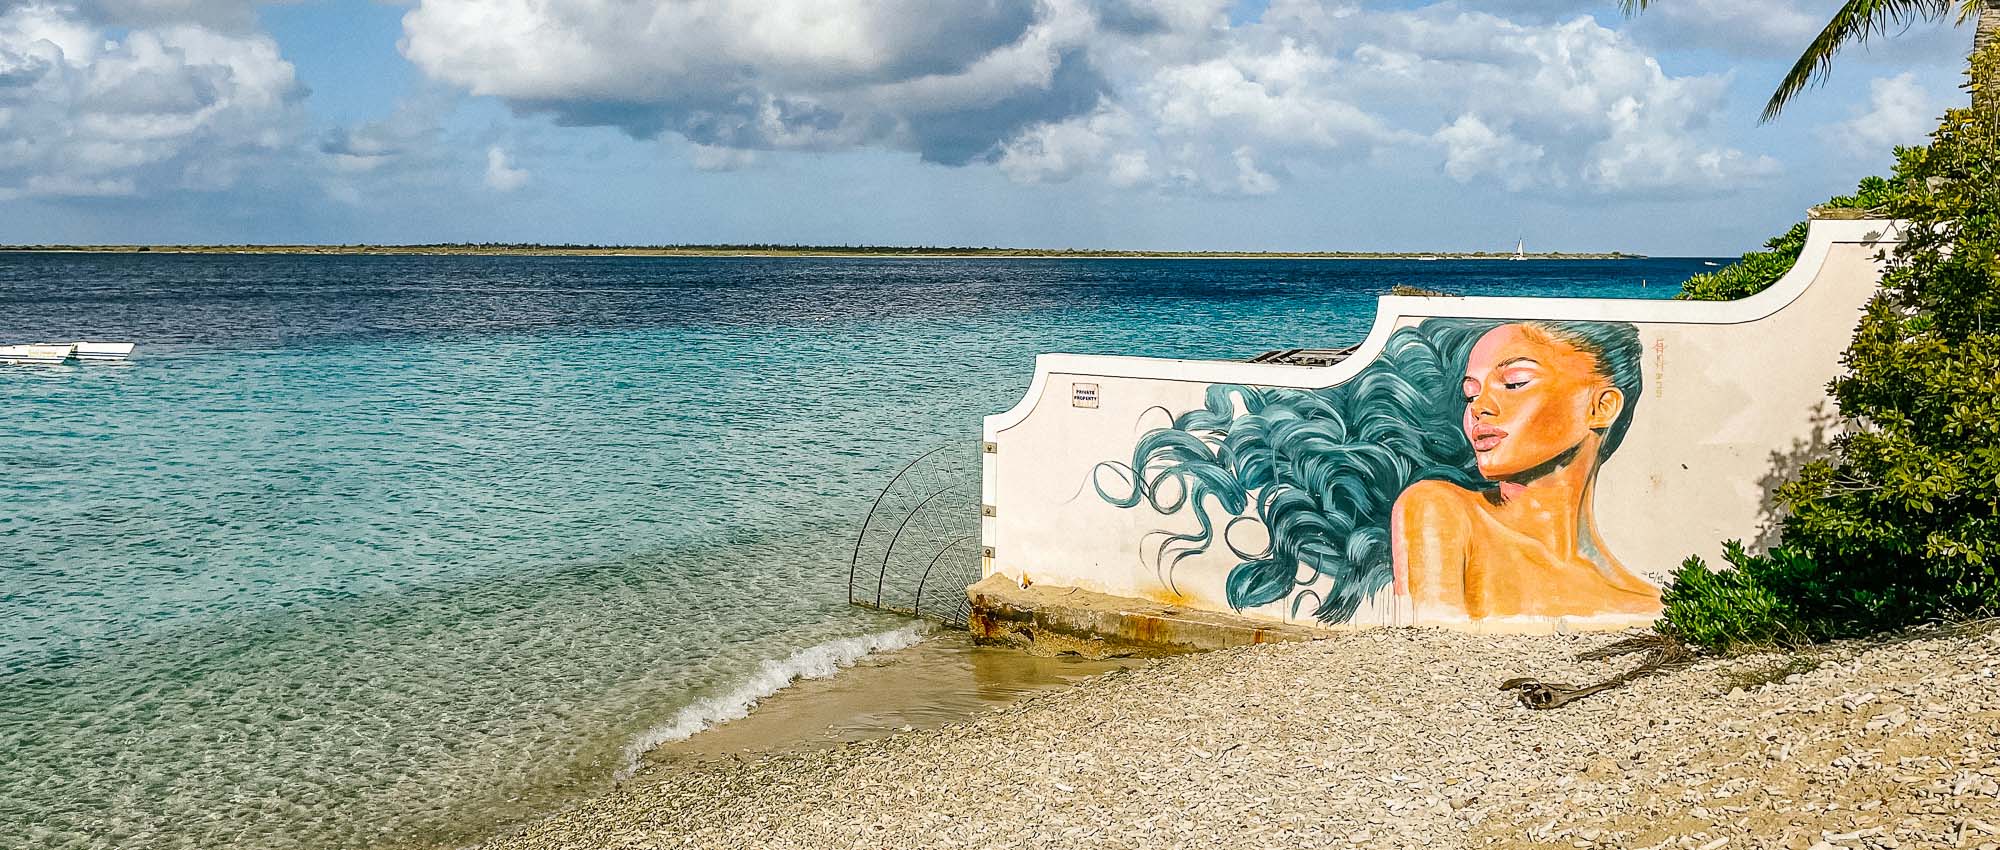 Mural of a woman with blue hair next to the shore